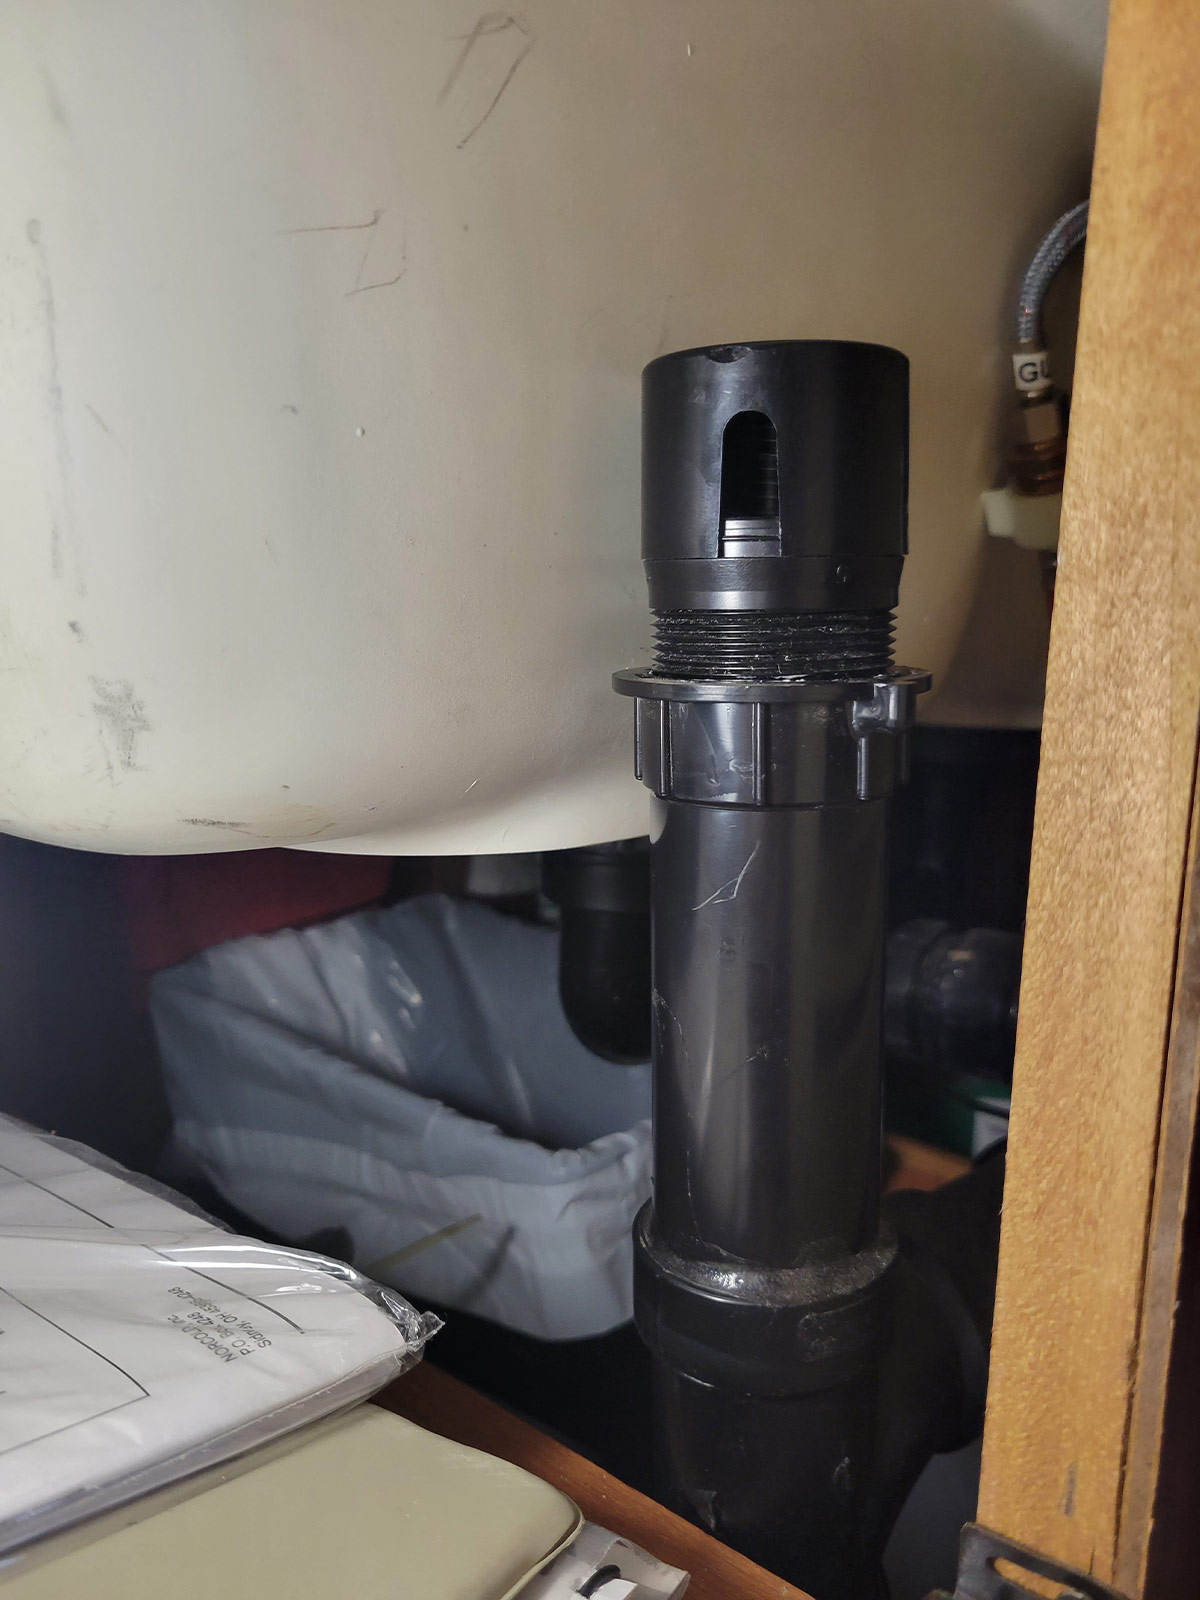 the original check vent, mounted to a pipe next to the P-trap